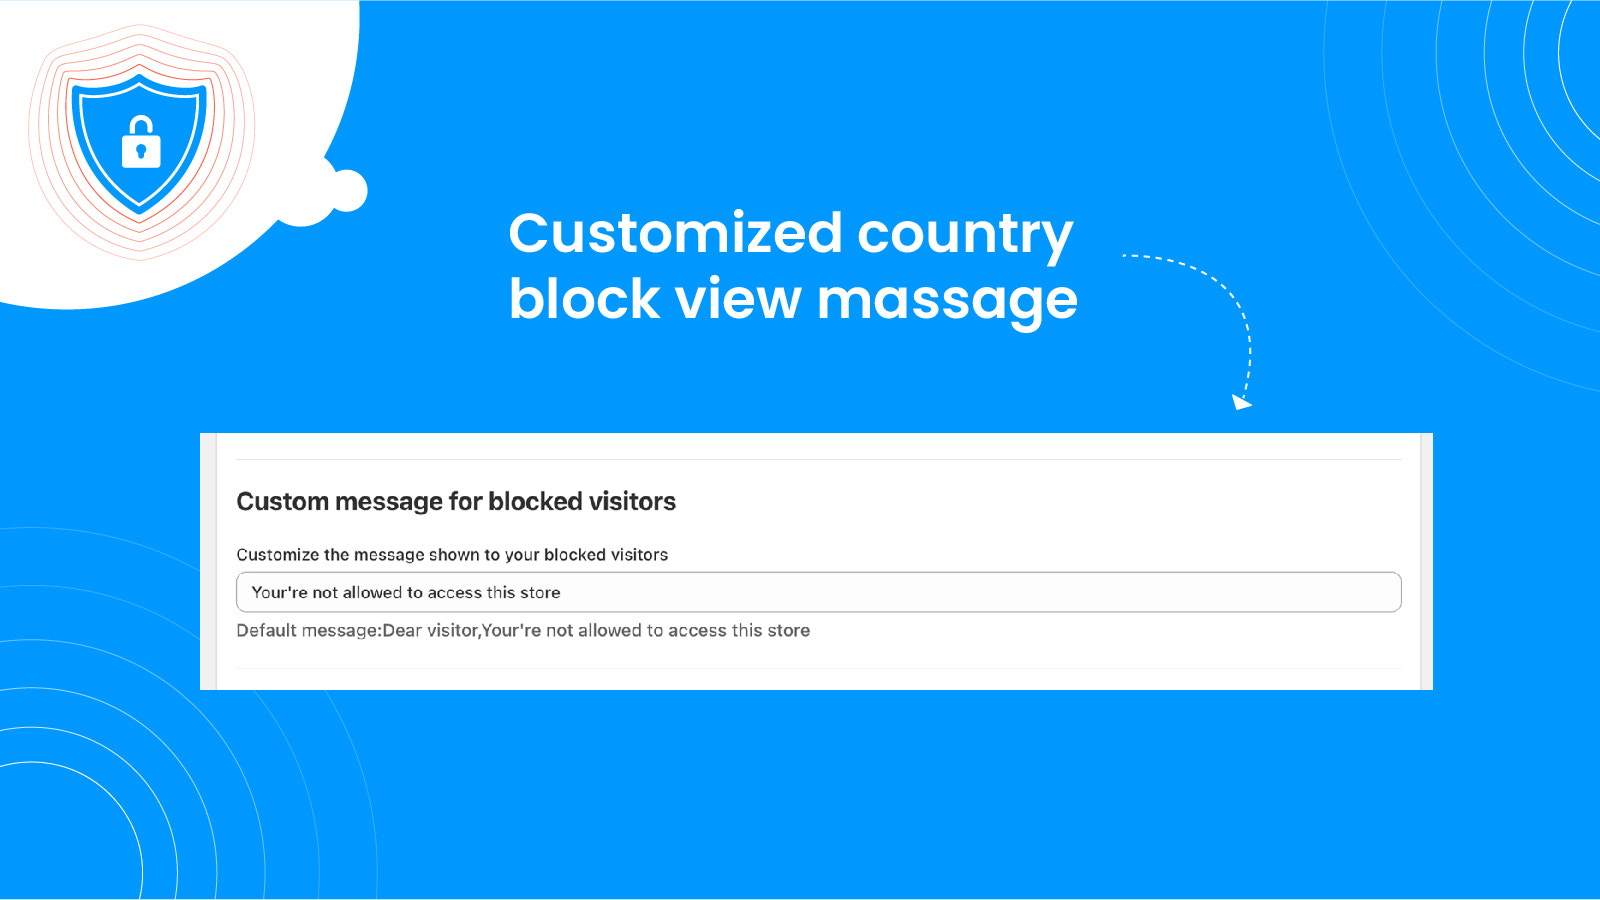 Customize what blocked traffic sees